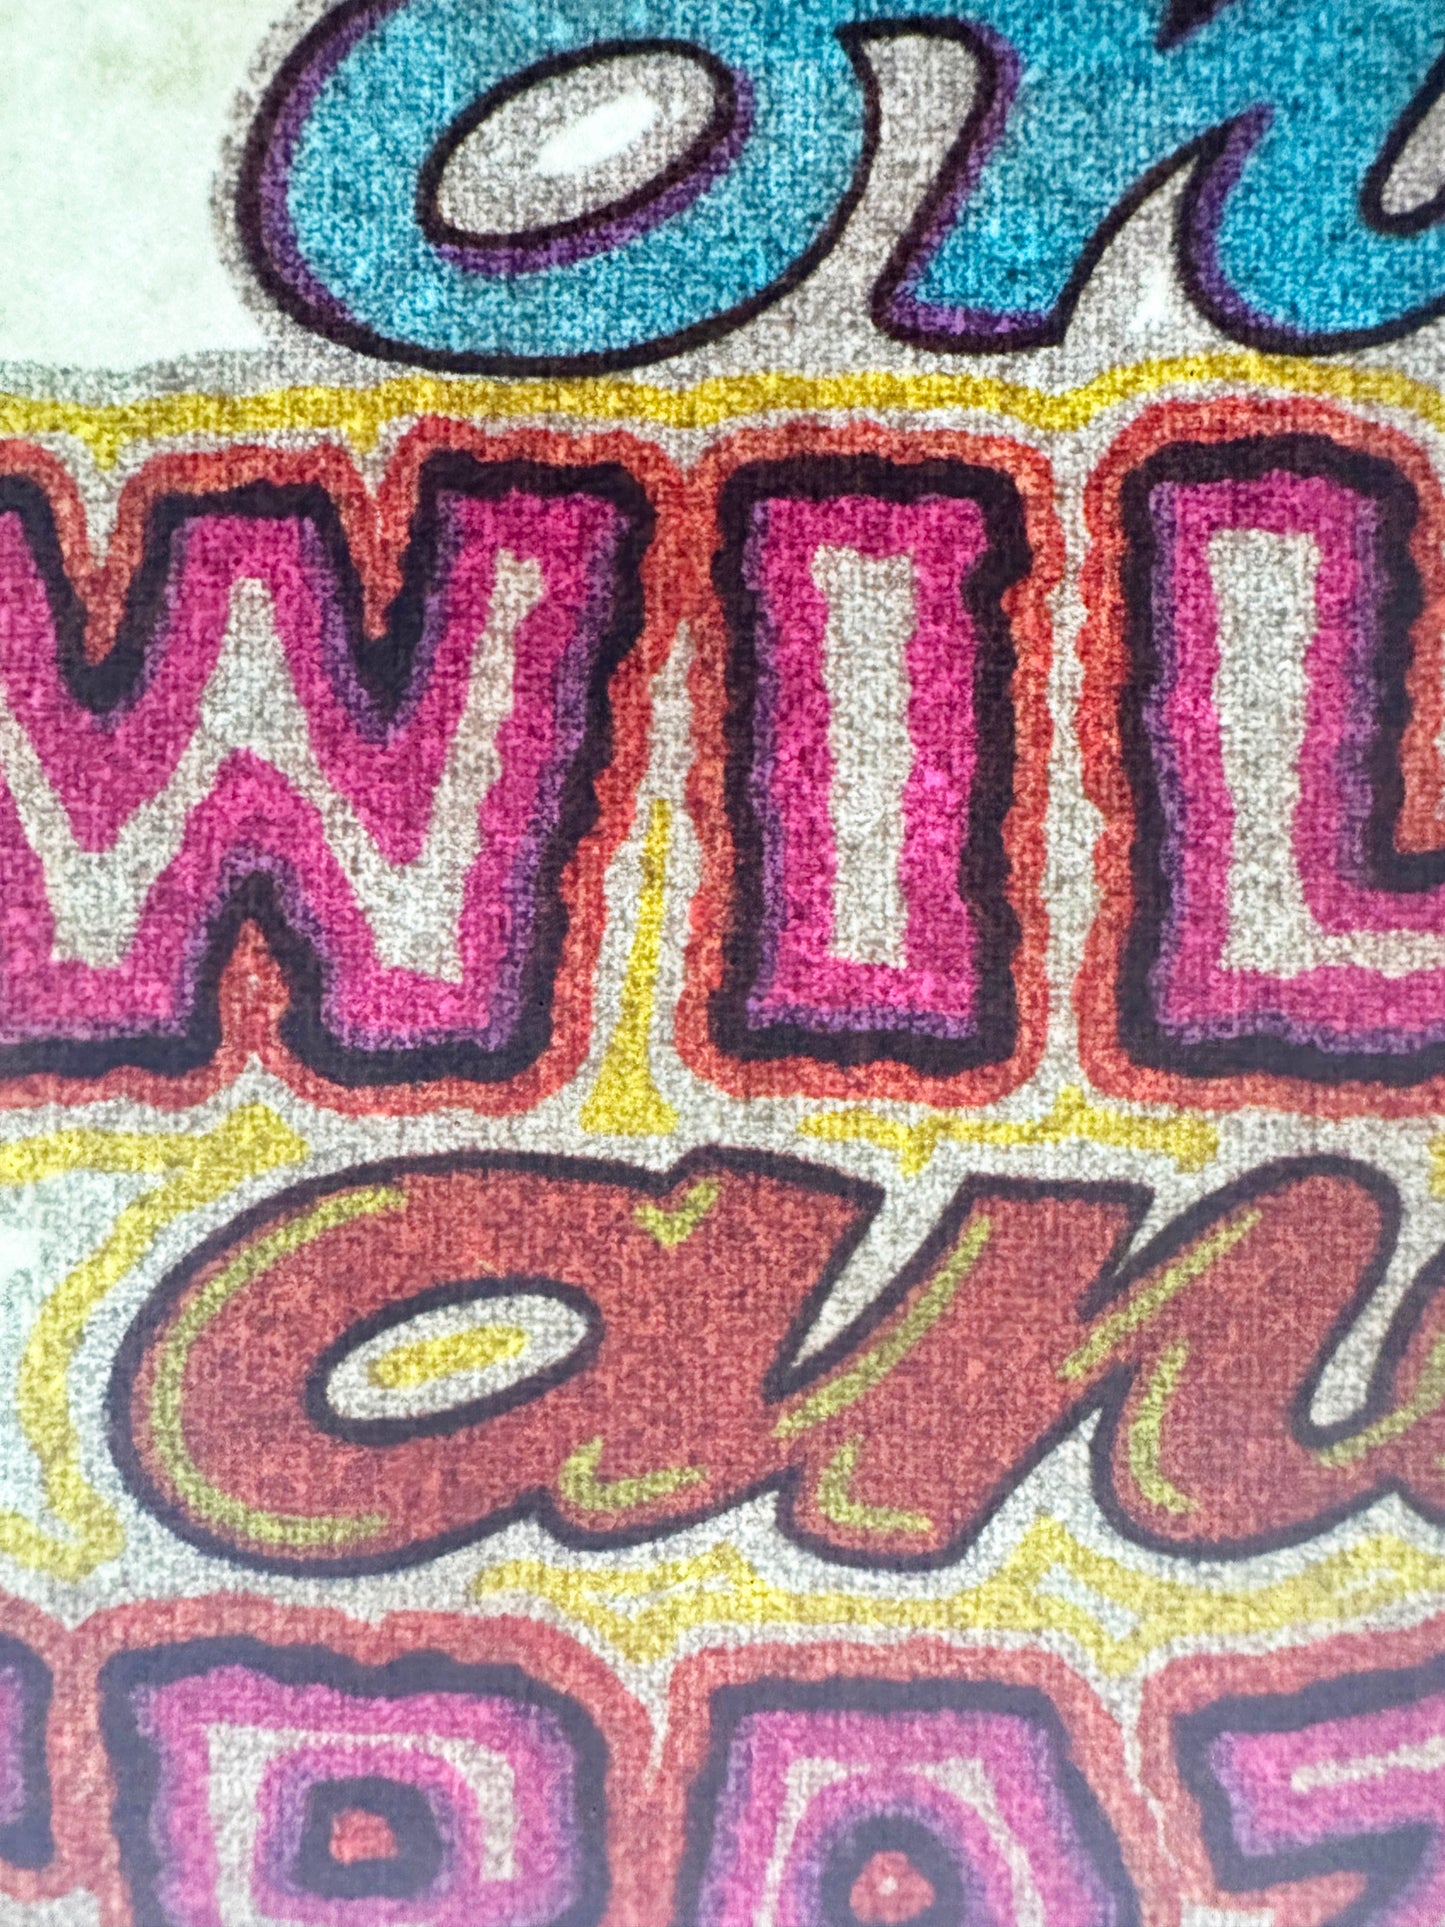 One Wild and Crazy Girl Vintage Glitter Iron On Heat Transfer